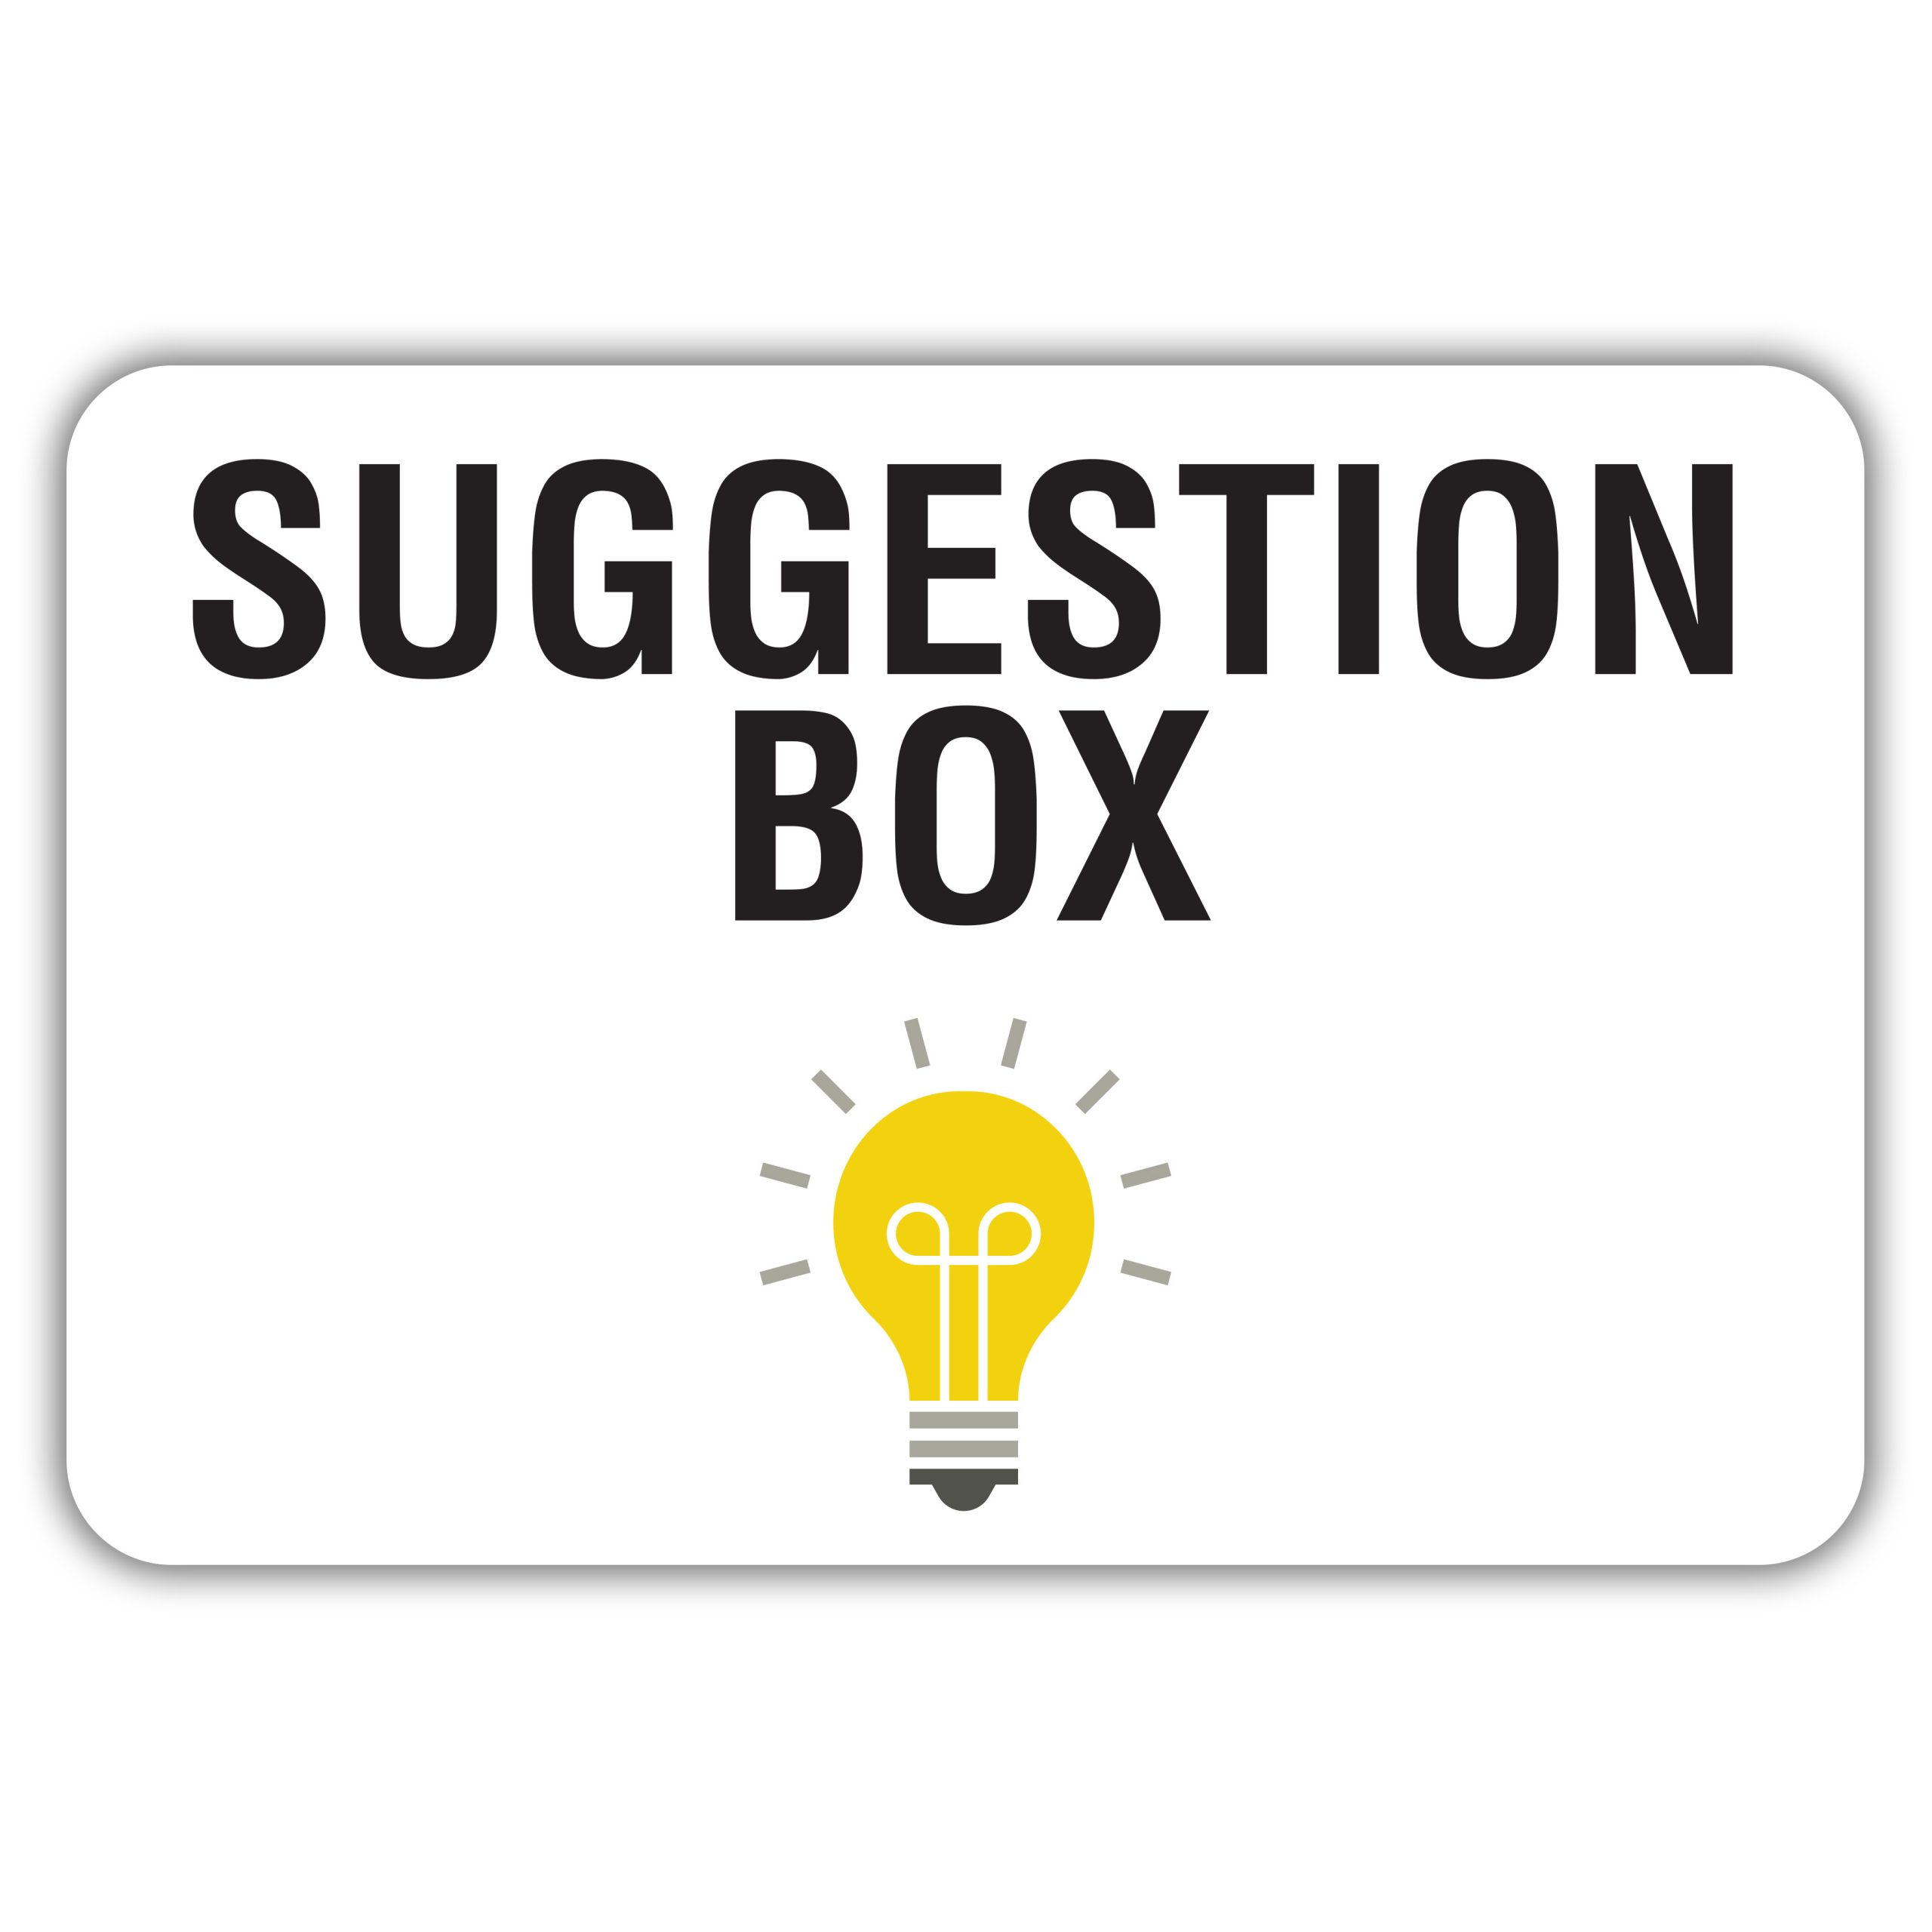 printable-suggestion-box-template-web-updated-june-30-2022